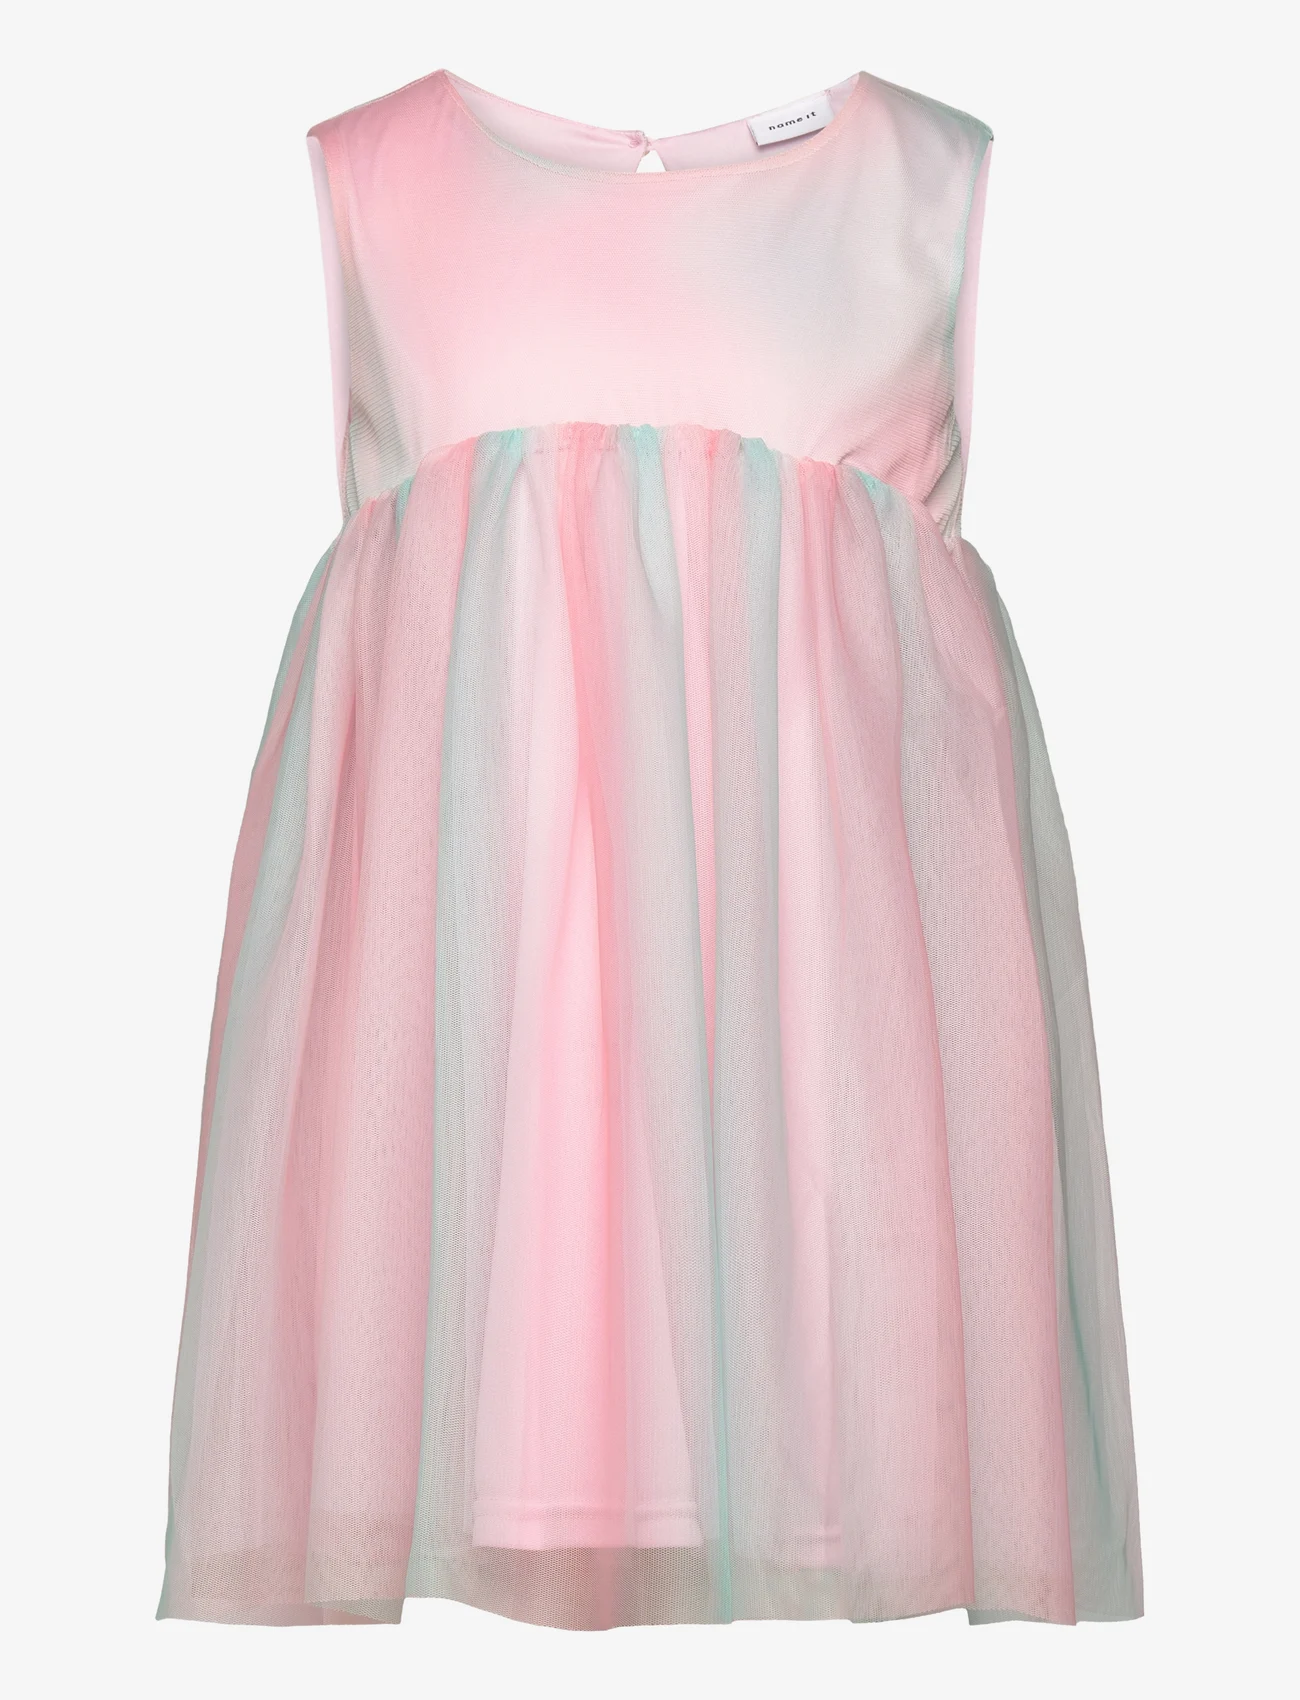 name it - NMFDAINBOW SPENCER - partydresses - parfait pink - 0